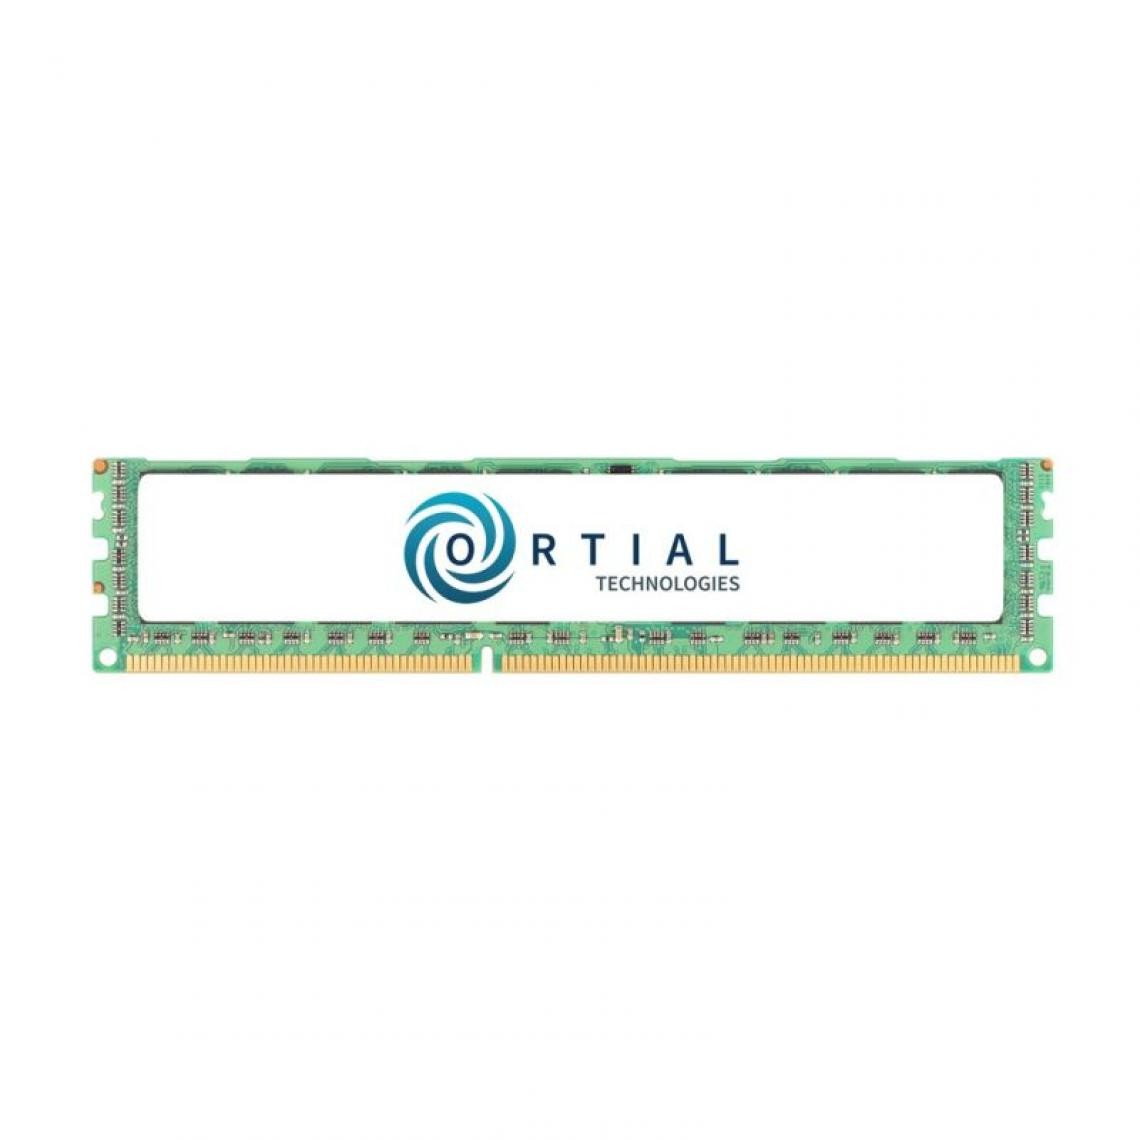 Inconnu - Ortial 8GB DDR4 2133 RDIMM - RAM PC Fixe